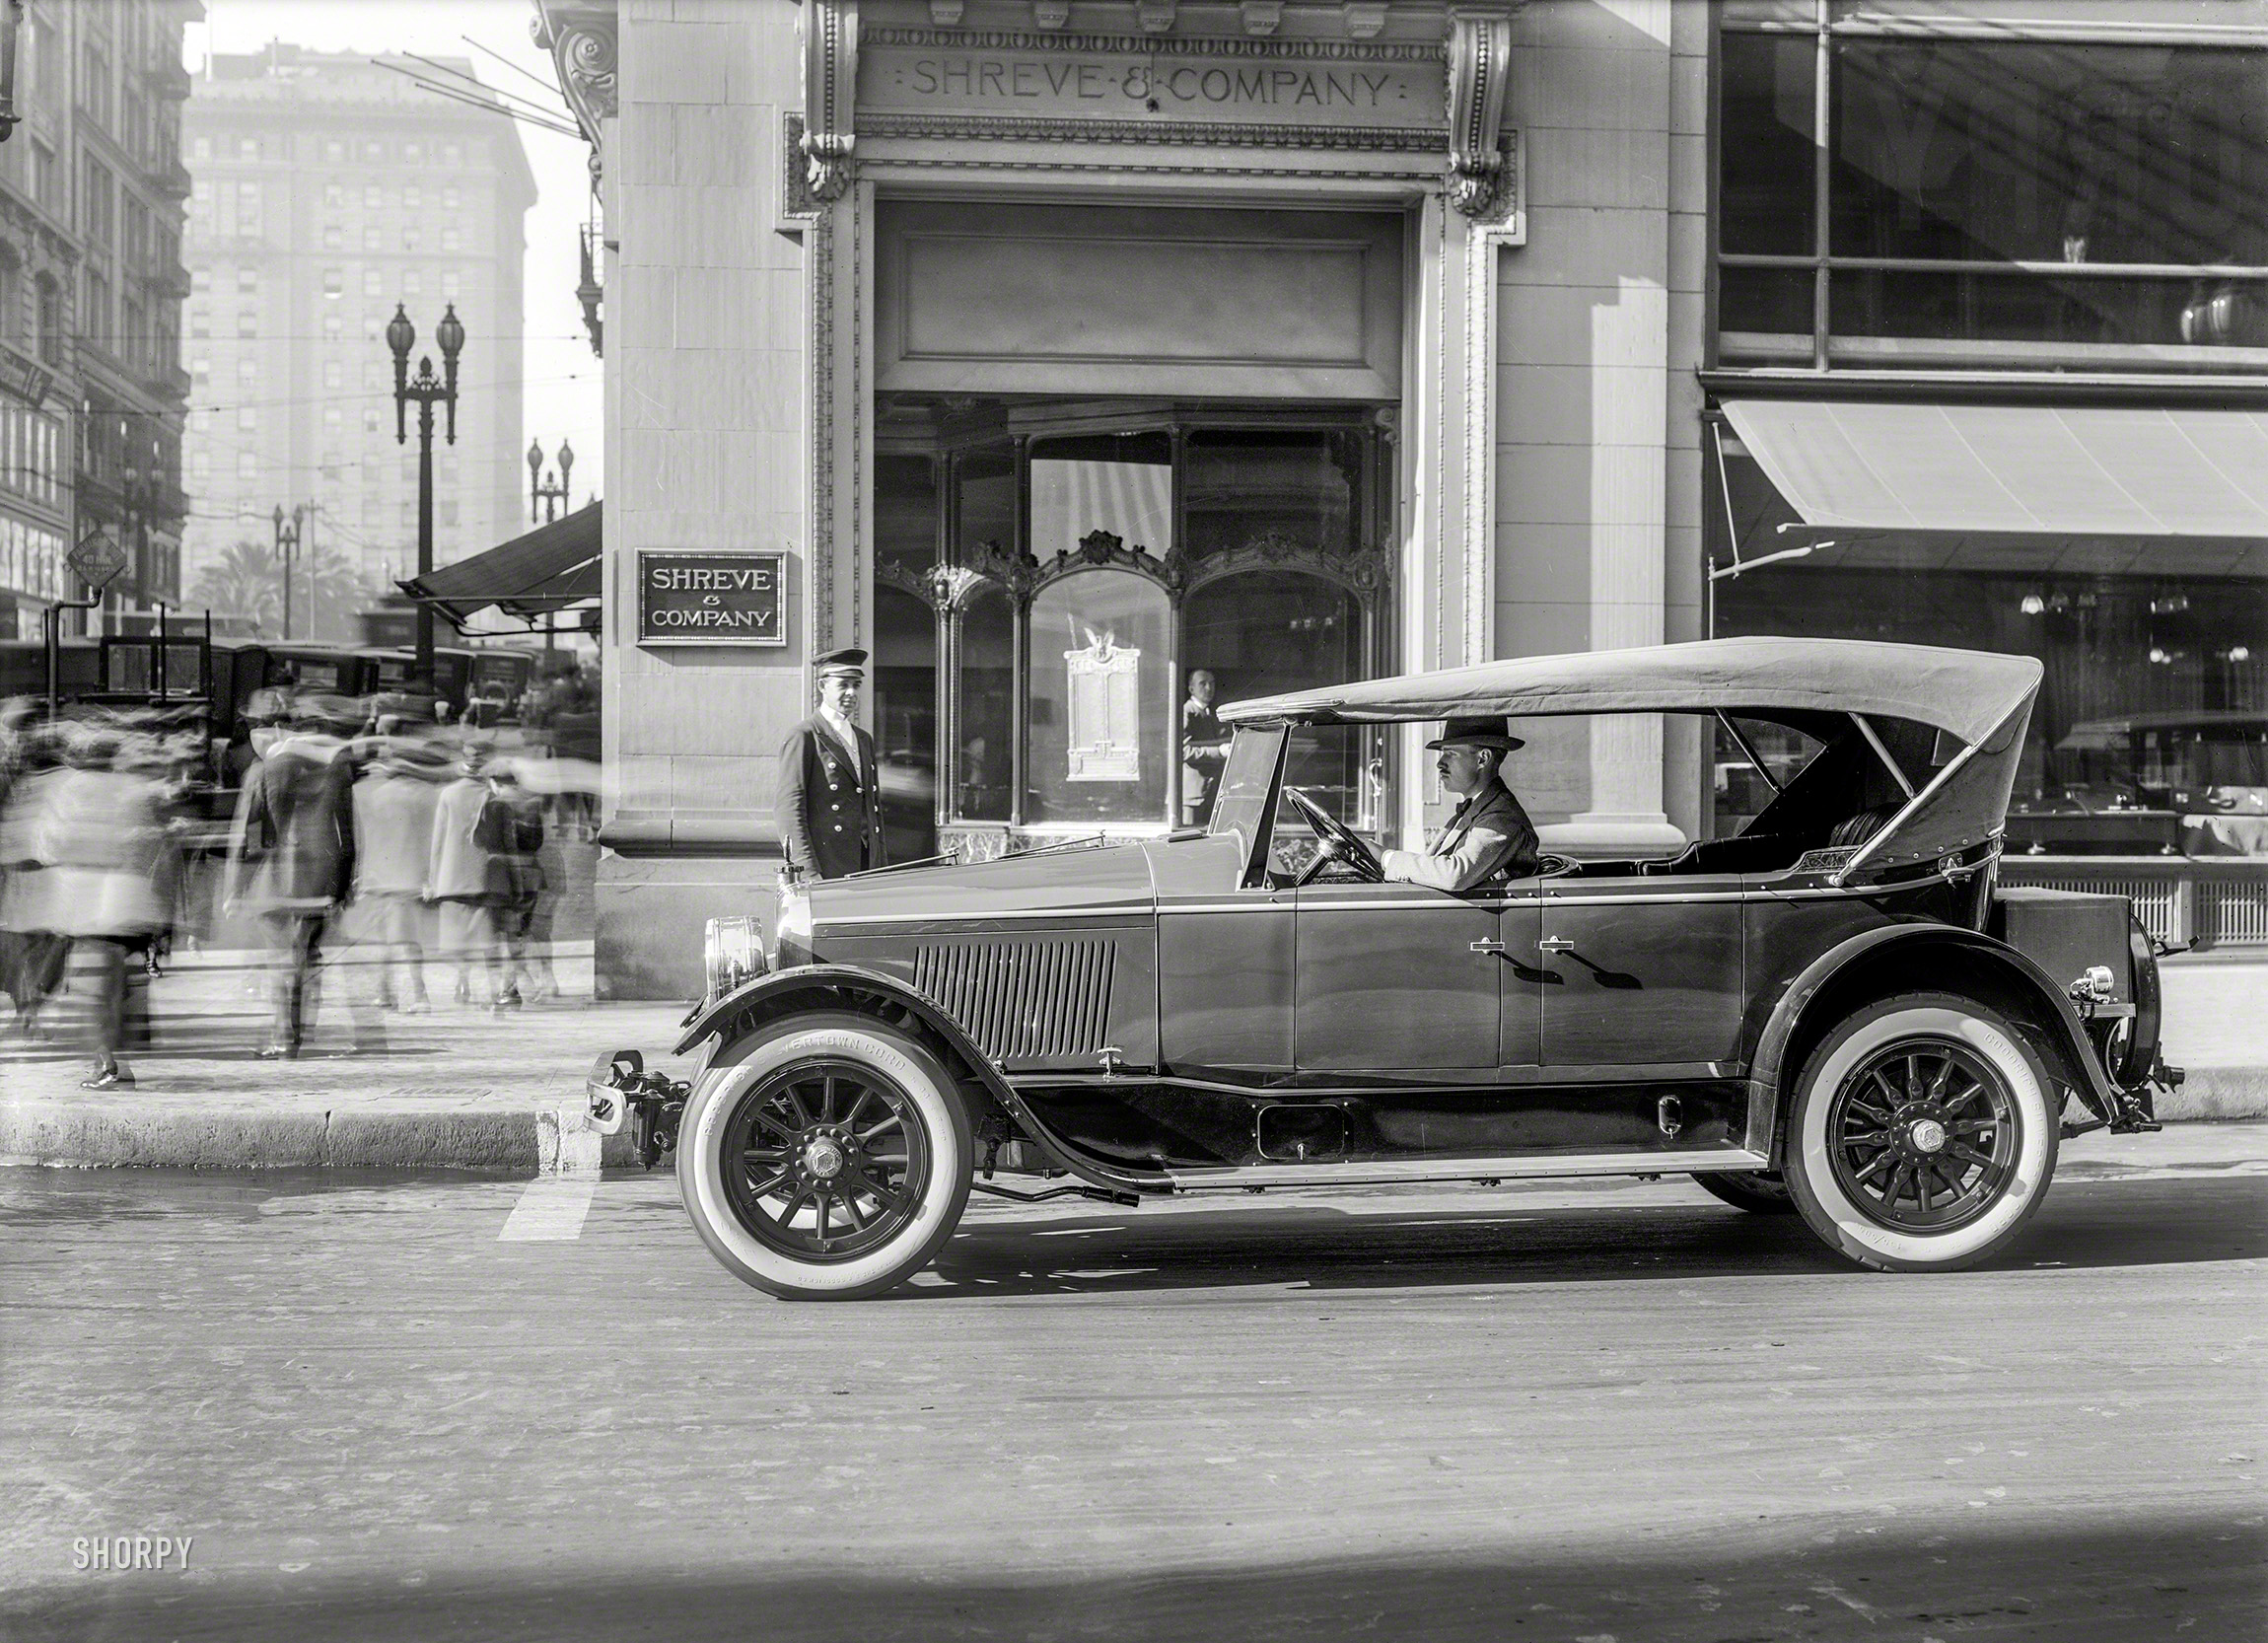 San Francisco circa 1922. "Dorris touring car at Shreve & Co." Latest entry in the Shorpy Parade of Archaic Chariots. Photo by Christopher Helin. View full size.